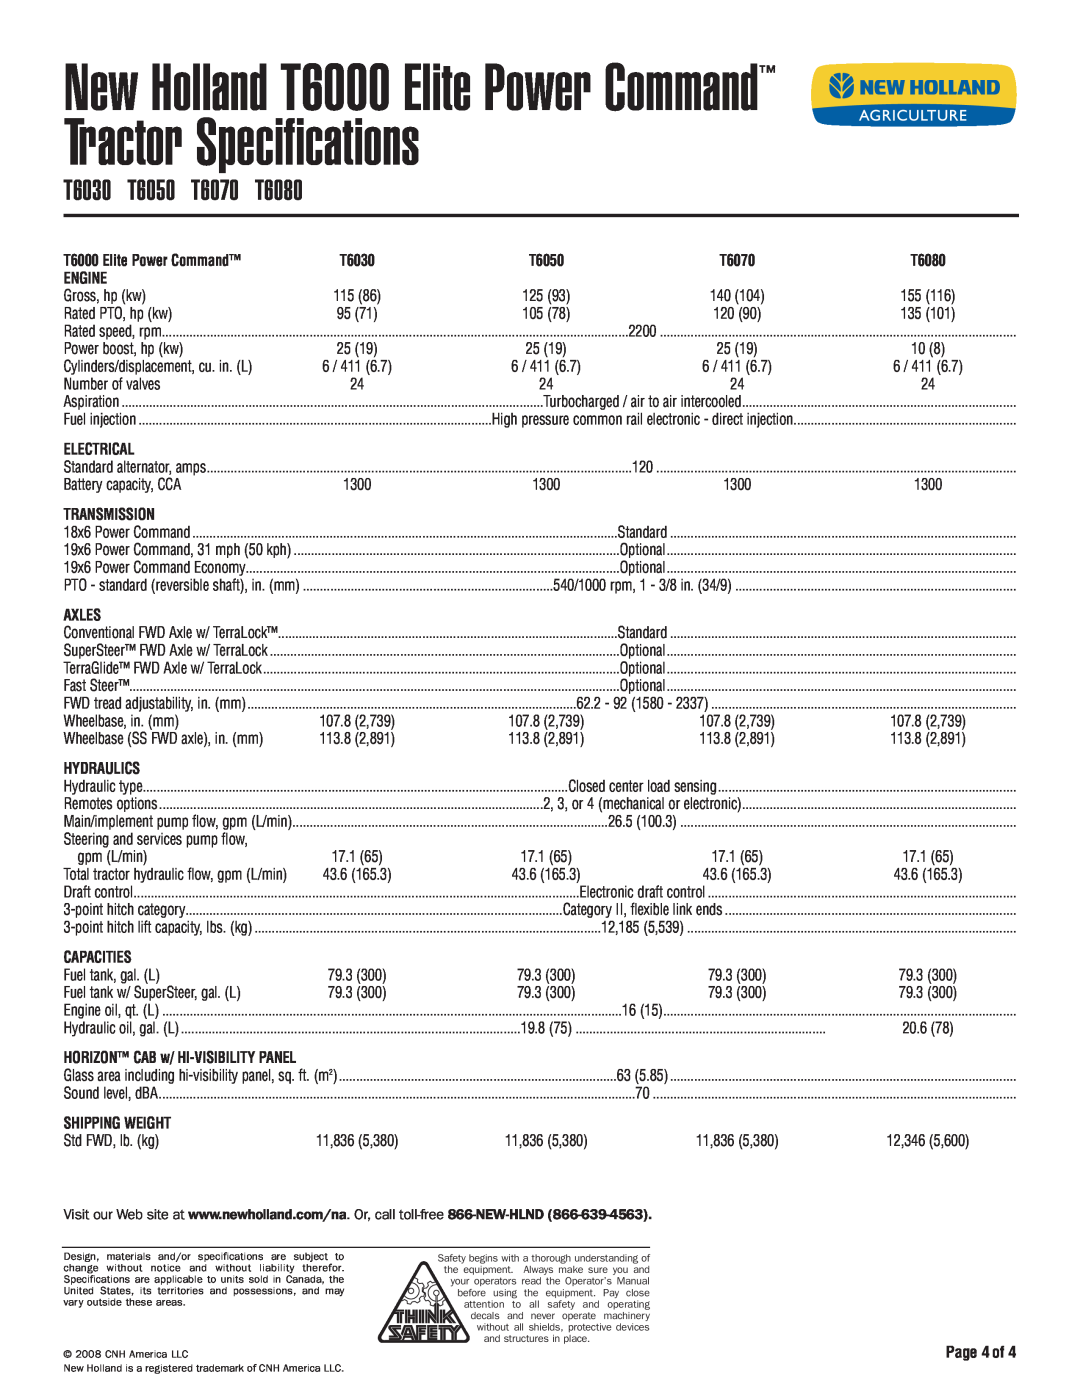 New Holland T6020 Tractor Specifications, New Holland T6000 Elite Power Command, T6070, T6080, T6030, Page 4of, T6050 